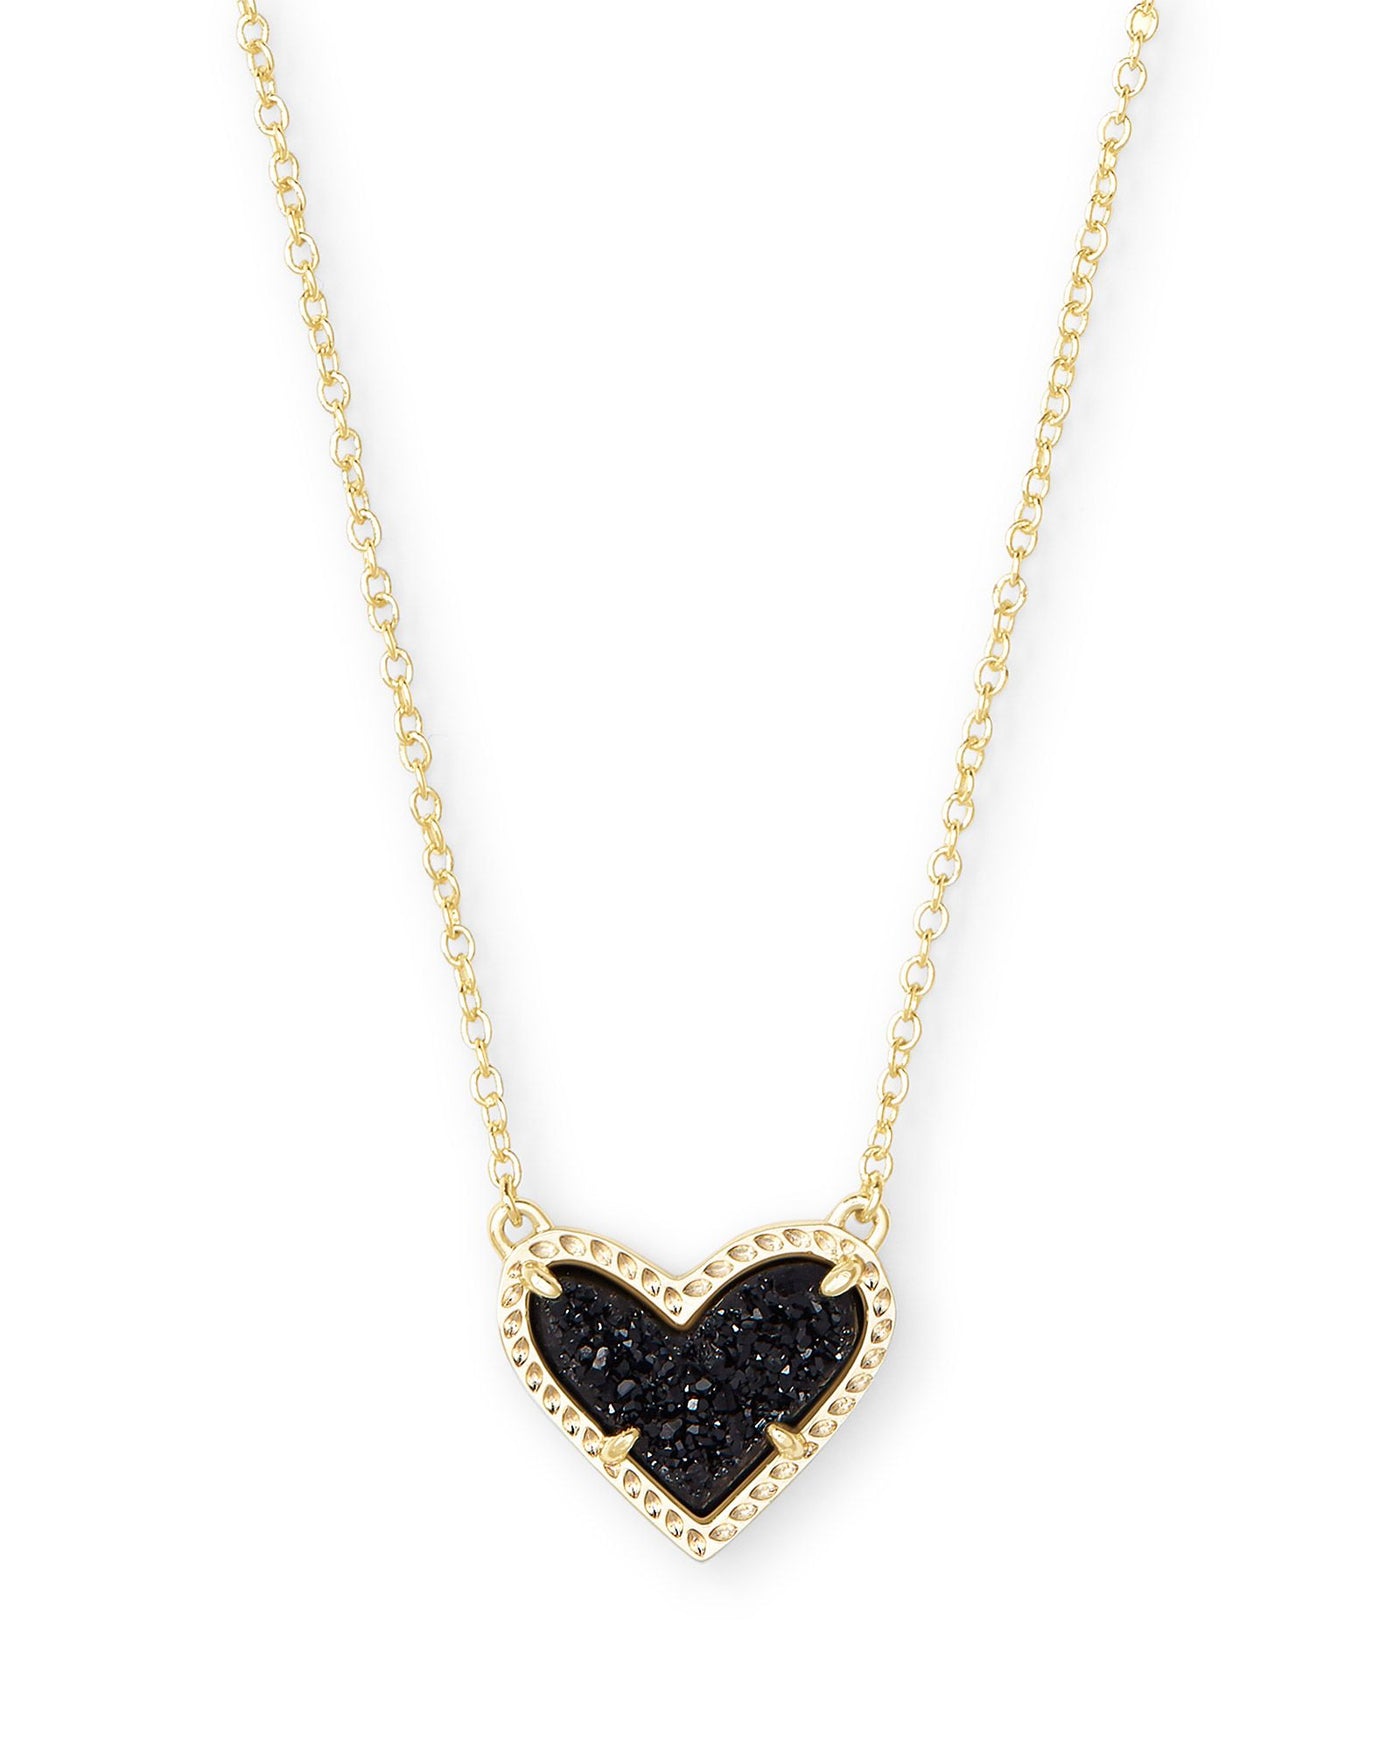 Kendra Scott Ari Heart Short Pendant Necklace In Gold Black Drusy-Necklaces-Kendra Scott-Market Street Nest, Fashionable Clothing, Shoes and Home Décor Located in Mabank, TX